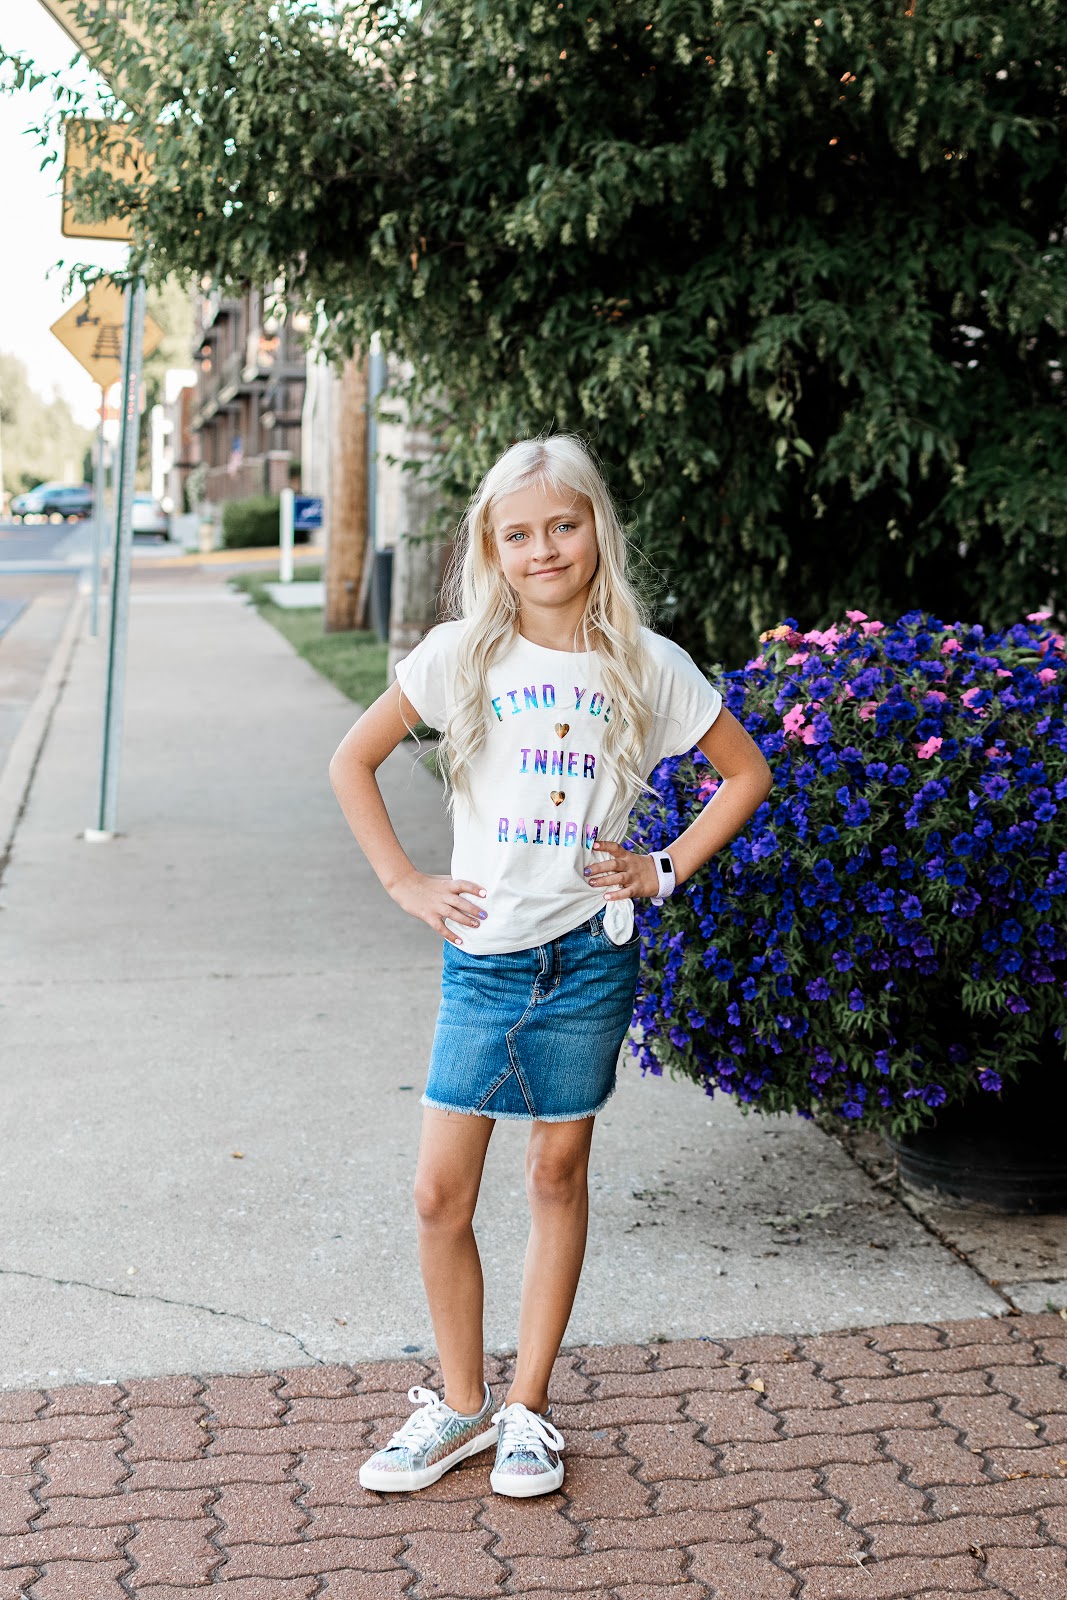 Back to School Shopping and First Day Looks with OshKosh! OshKosh Bgosh Back to School shirt back to school pants back to school shorts back to school skirt back to school look backpack outfit style clothes fashion ideas inspiration back to school shopping  OshKosh coupon code OshKosh promo code